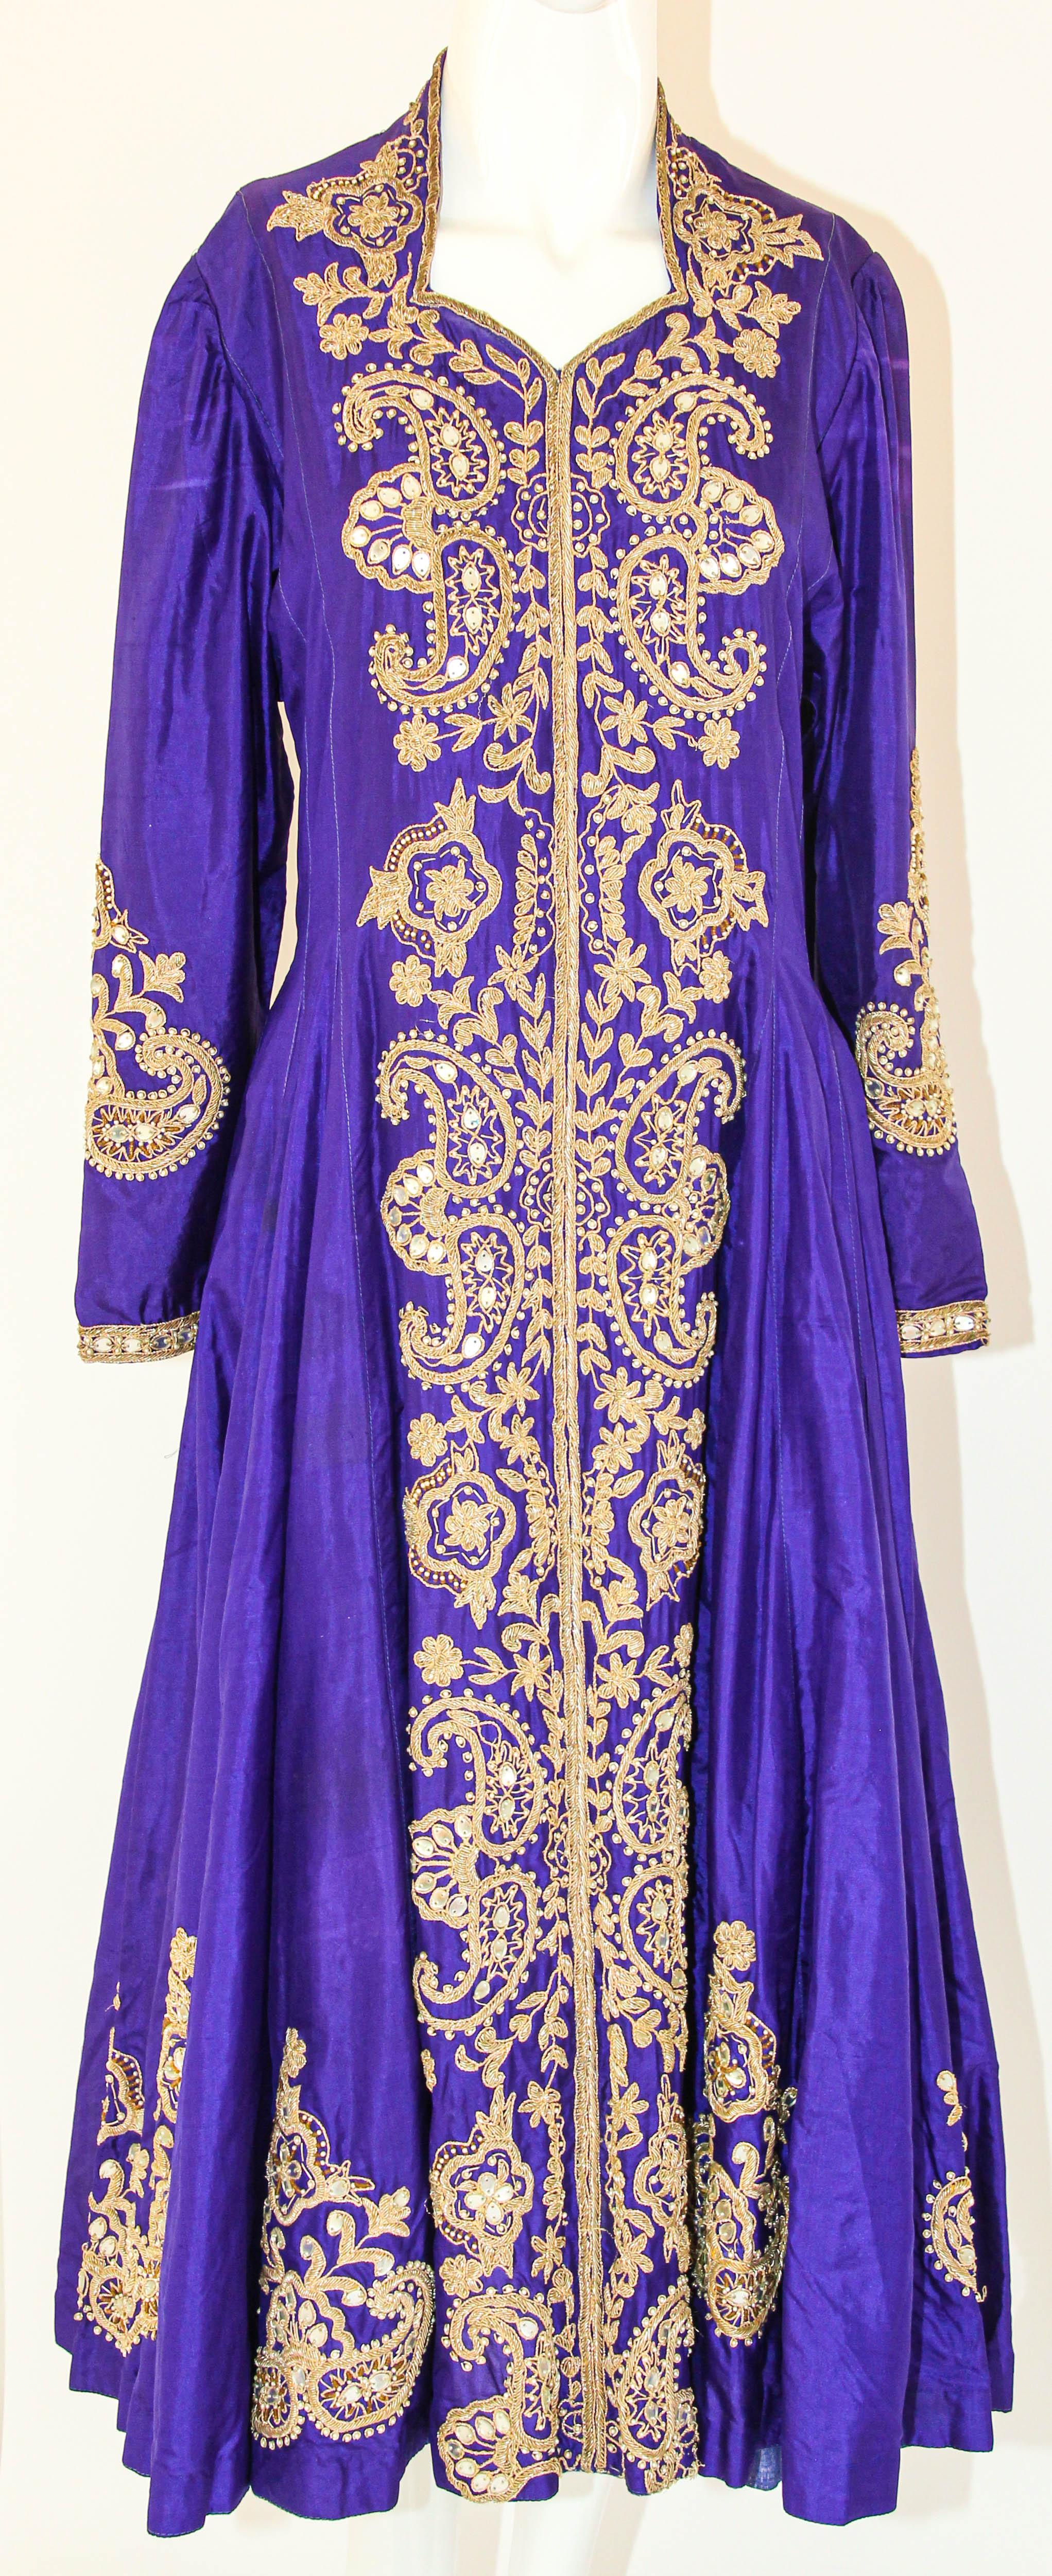  Vintage Purple Silk Embroidered Maxi Dress Anarkali Kashmir Princess Gown In Good Condition For Sale In North Hollywood, CA